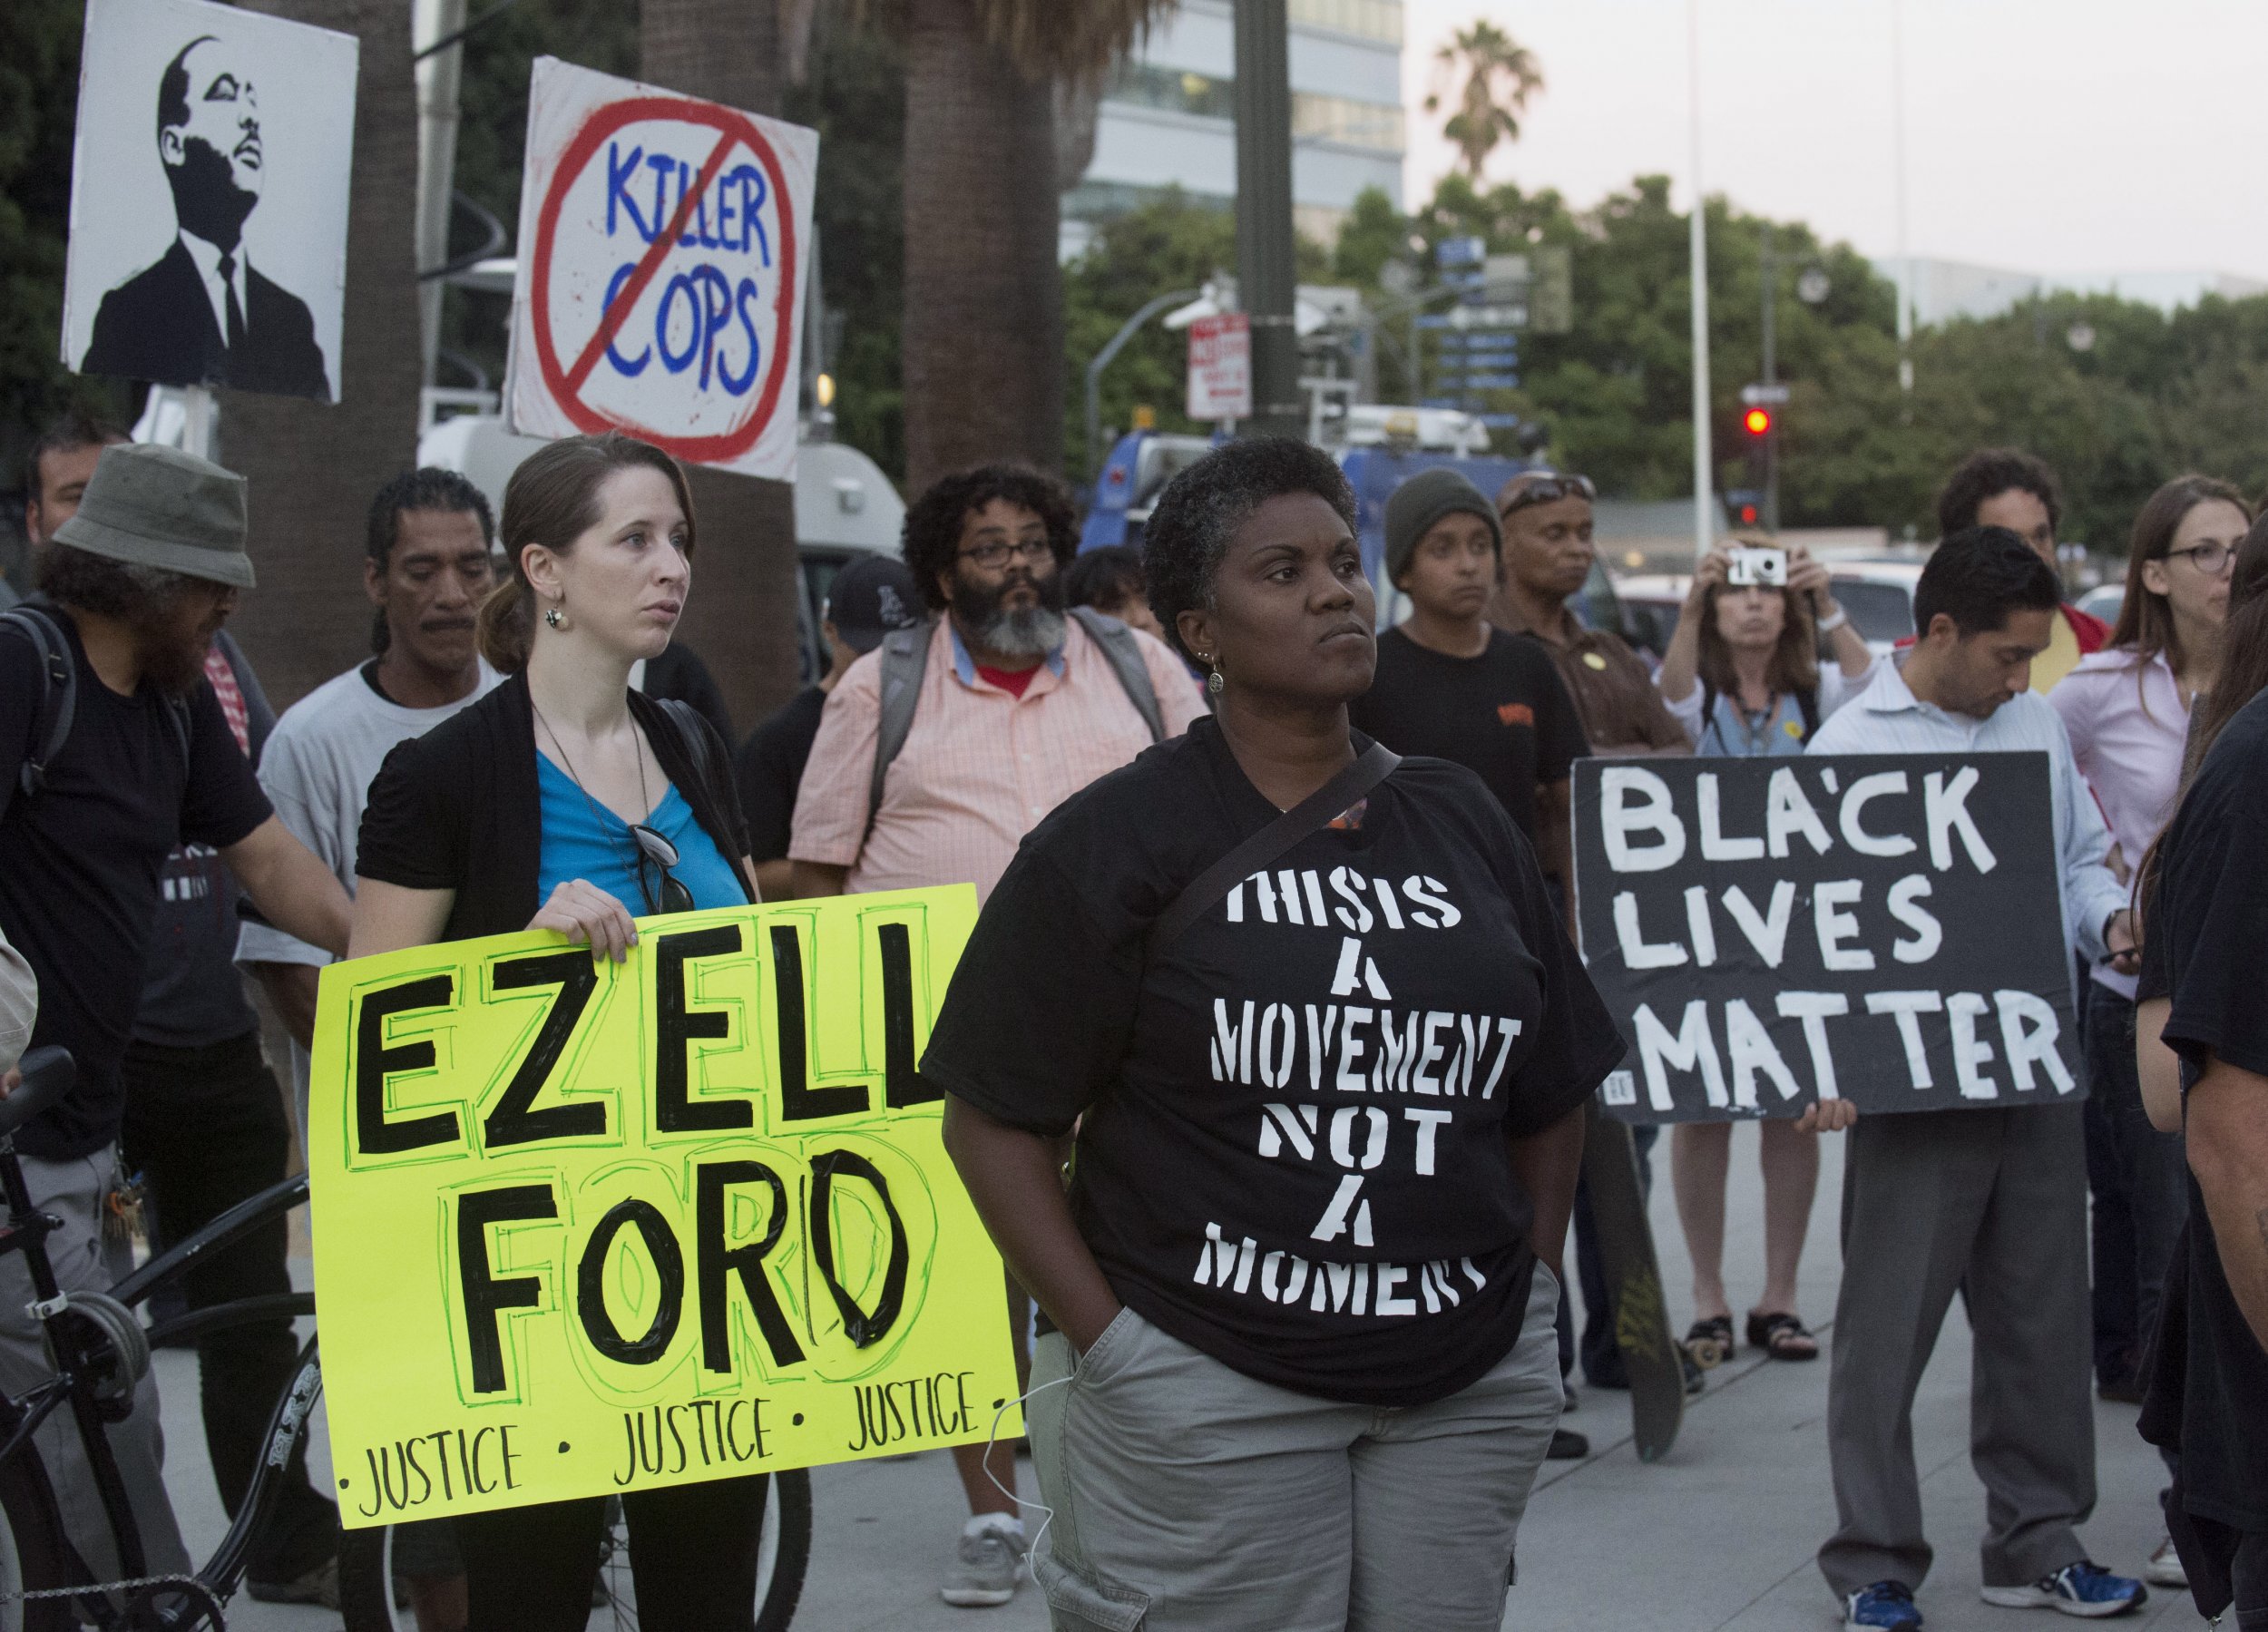 Ezell Ford Protests